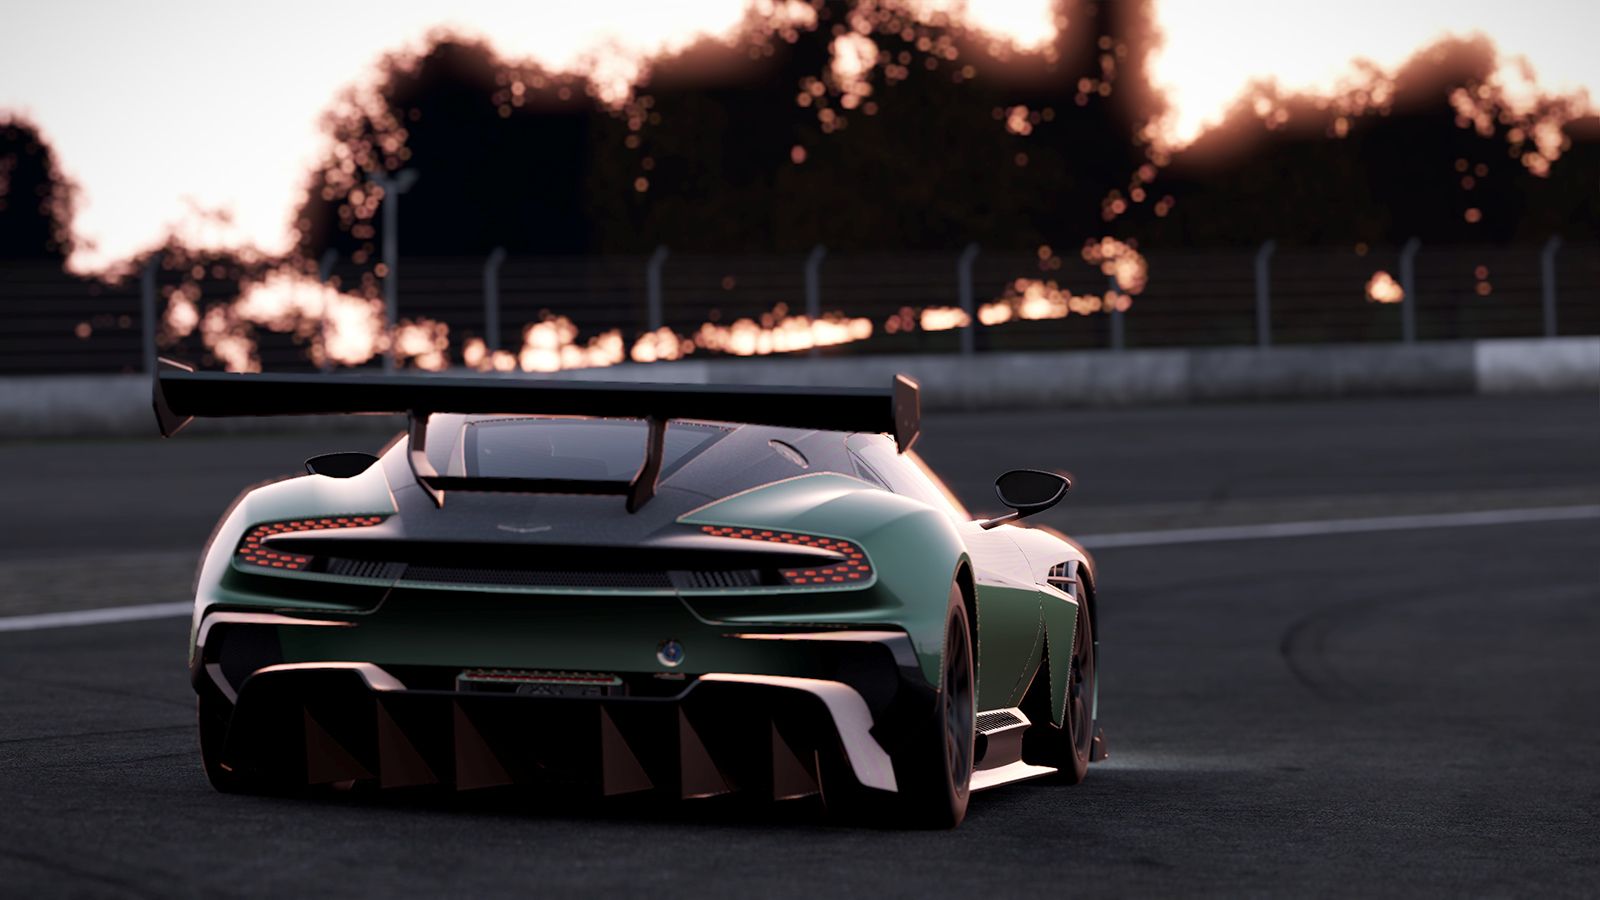 project cars 2 gameplay preview image 3